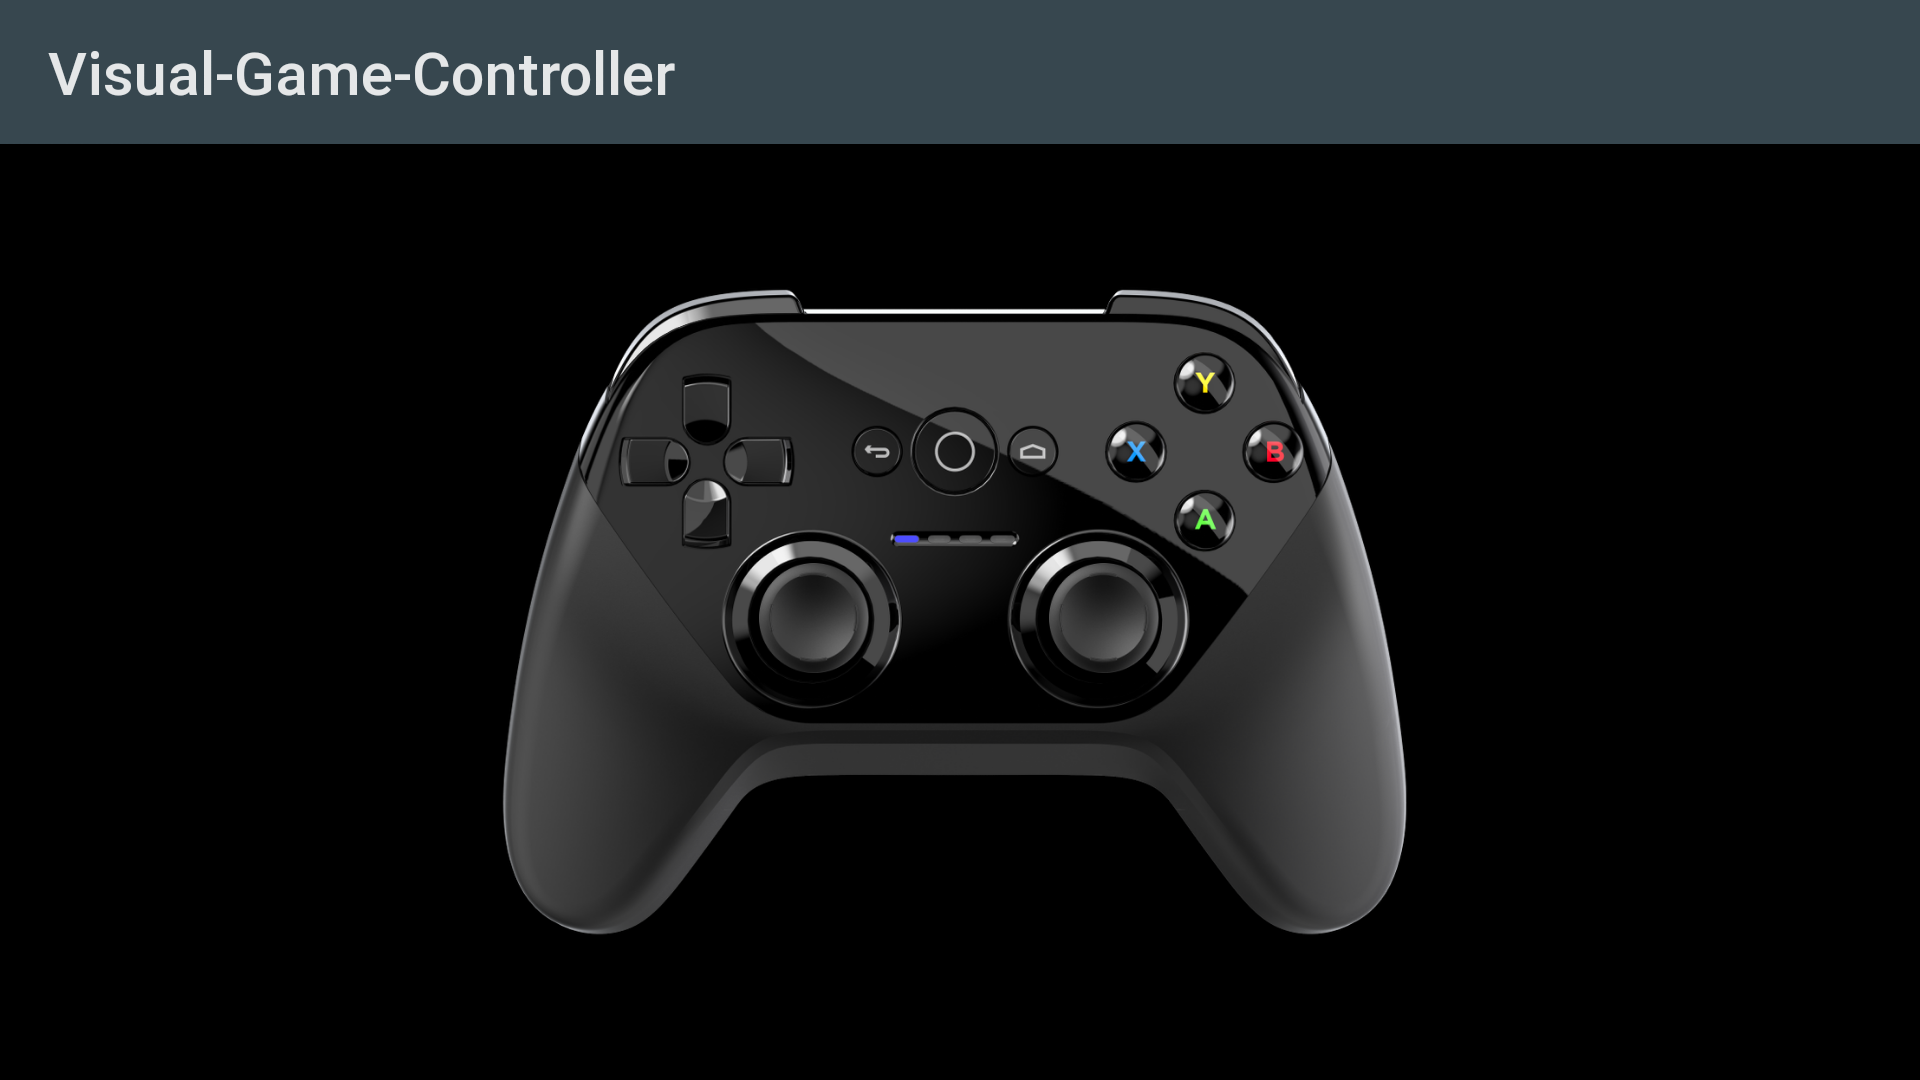 Xamarin.Android - Visual Game Controller - Code Samples | Microsoft Learn